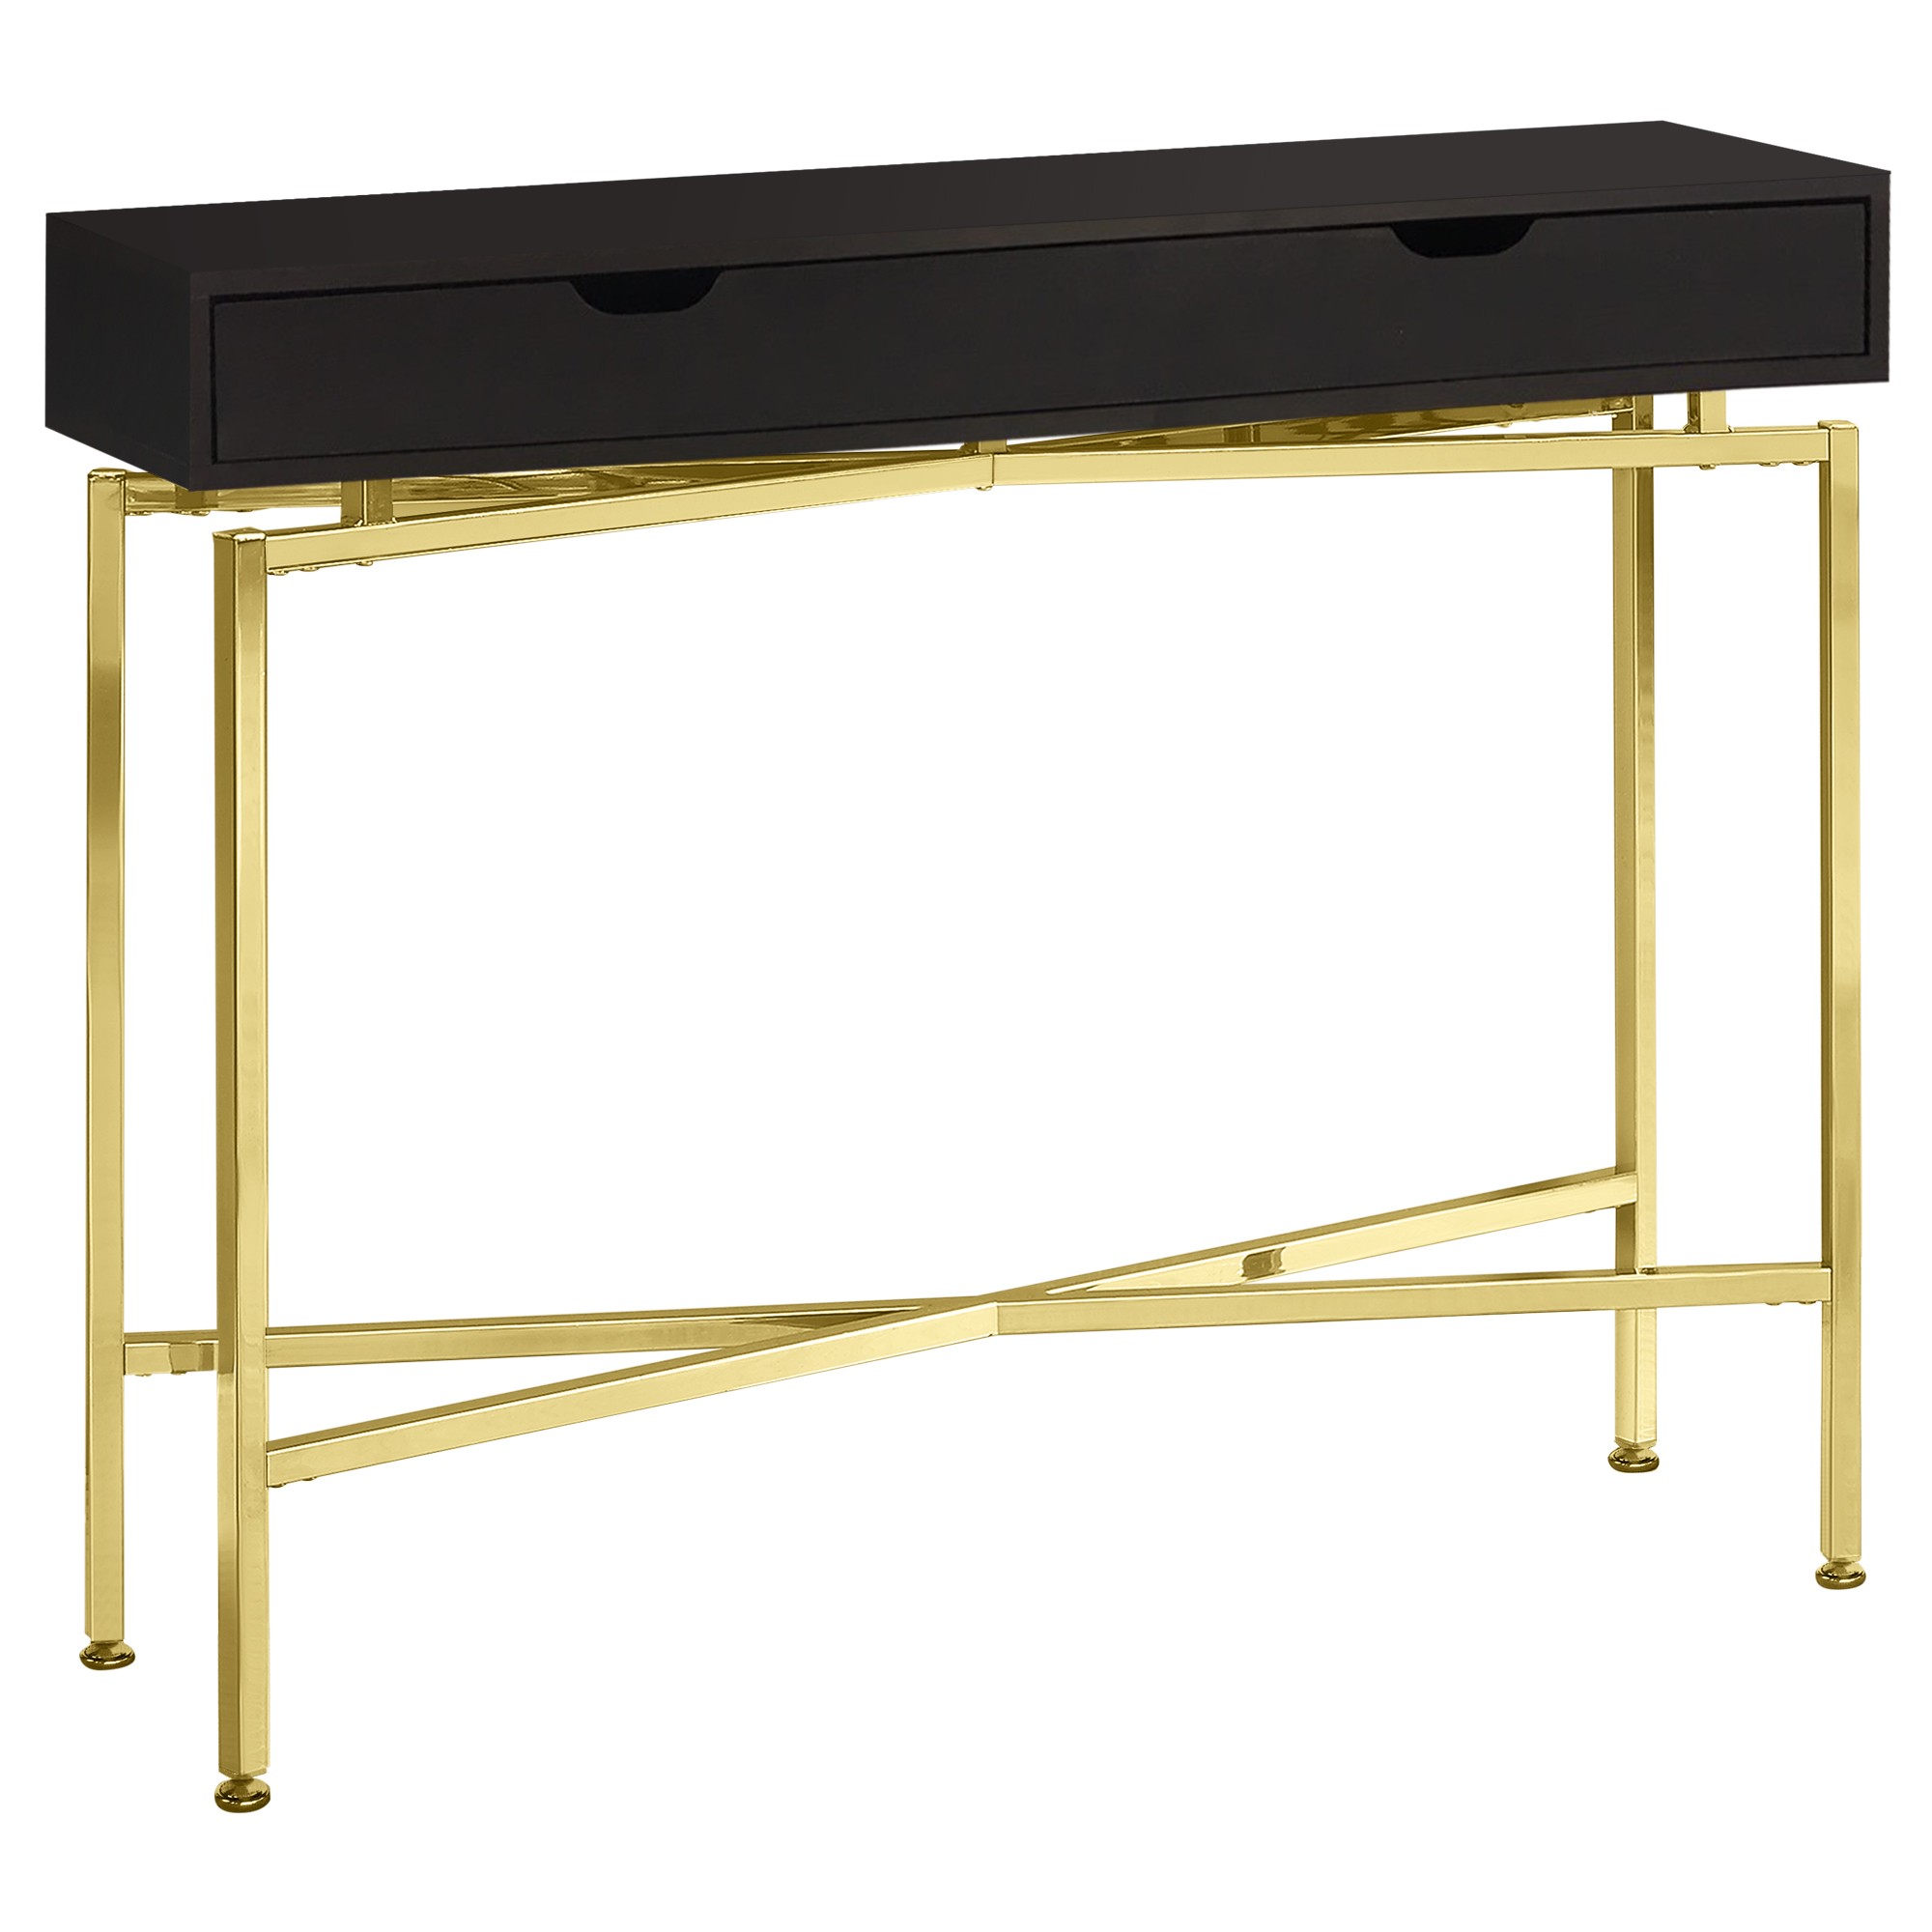 12" x 42.5" x 32.5" CappuccinoGold Hall Console Accent Table